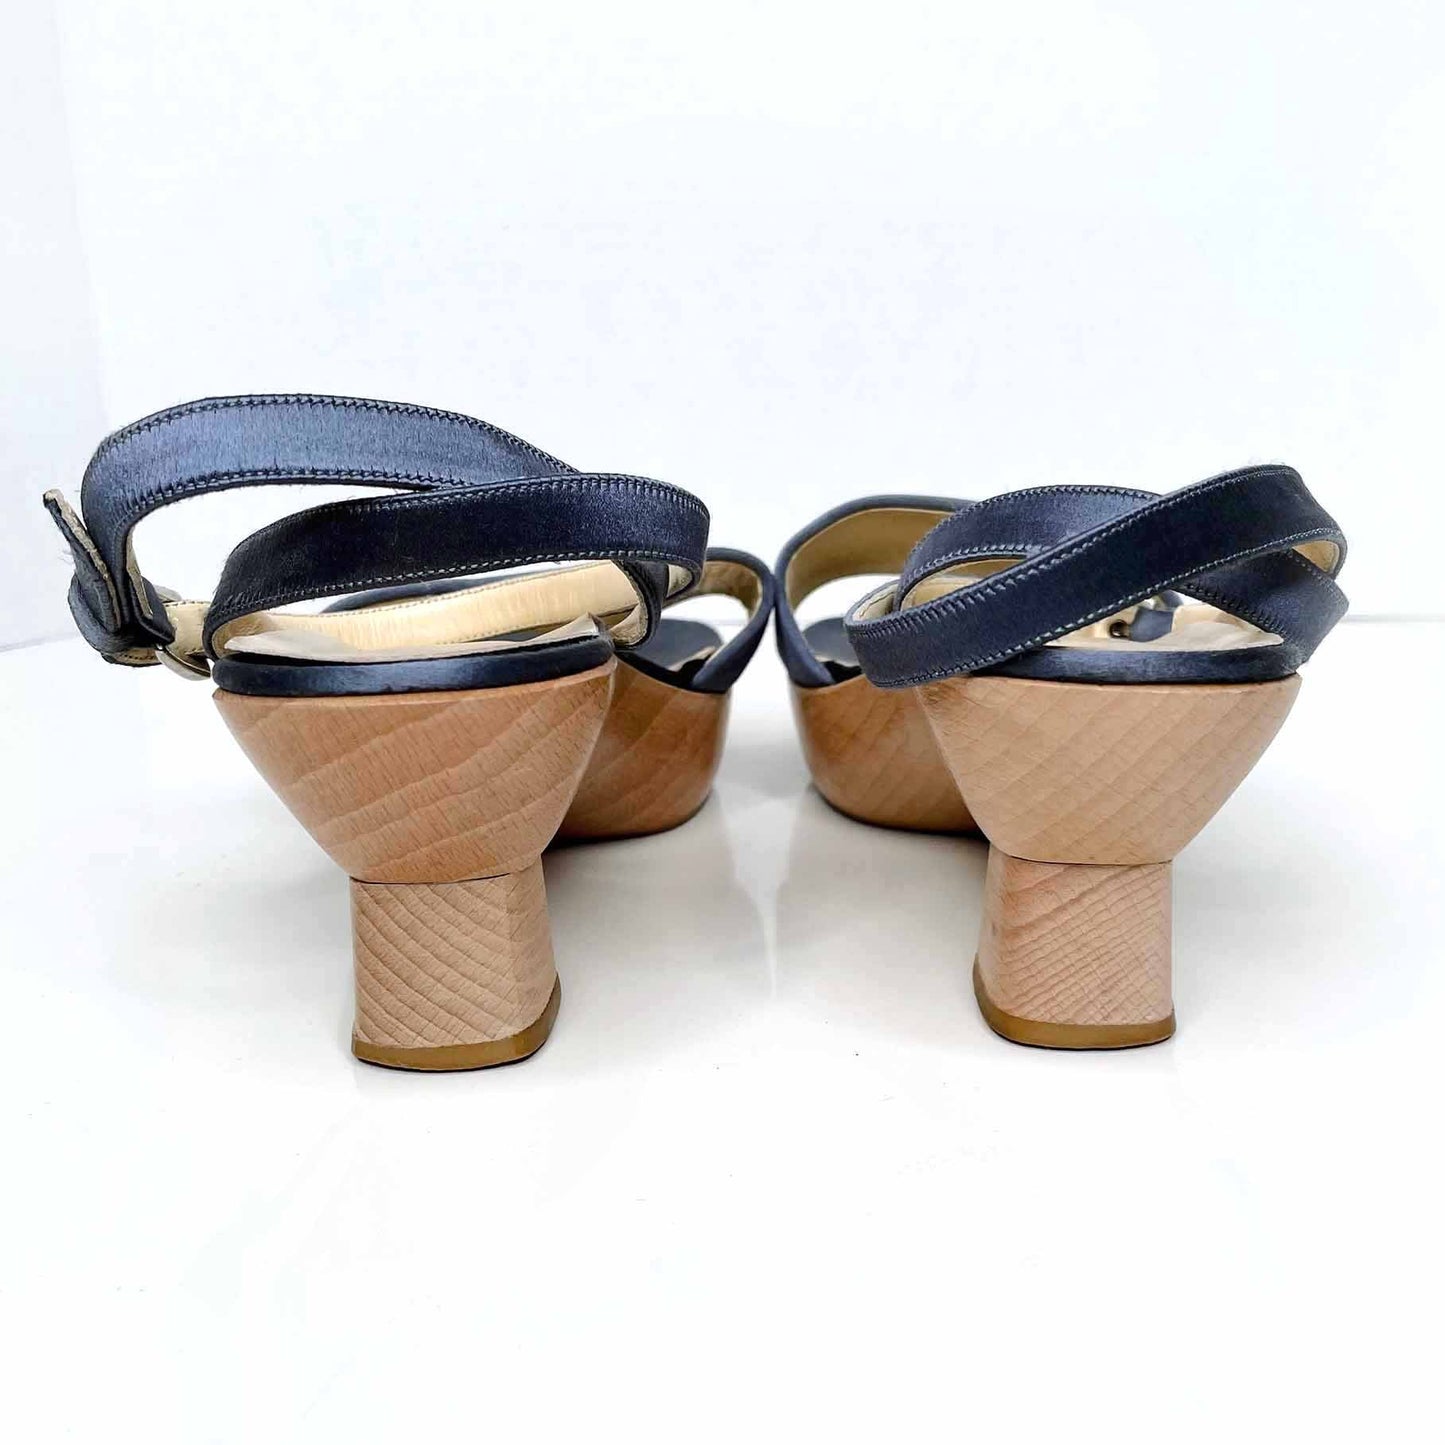 prada blue satin sandals with wood sole - size 37